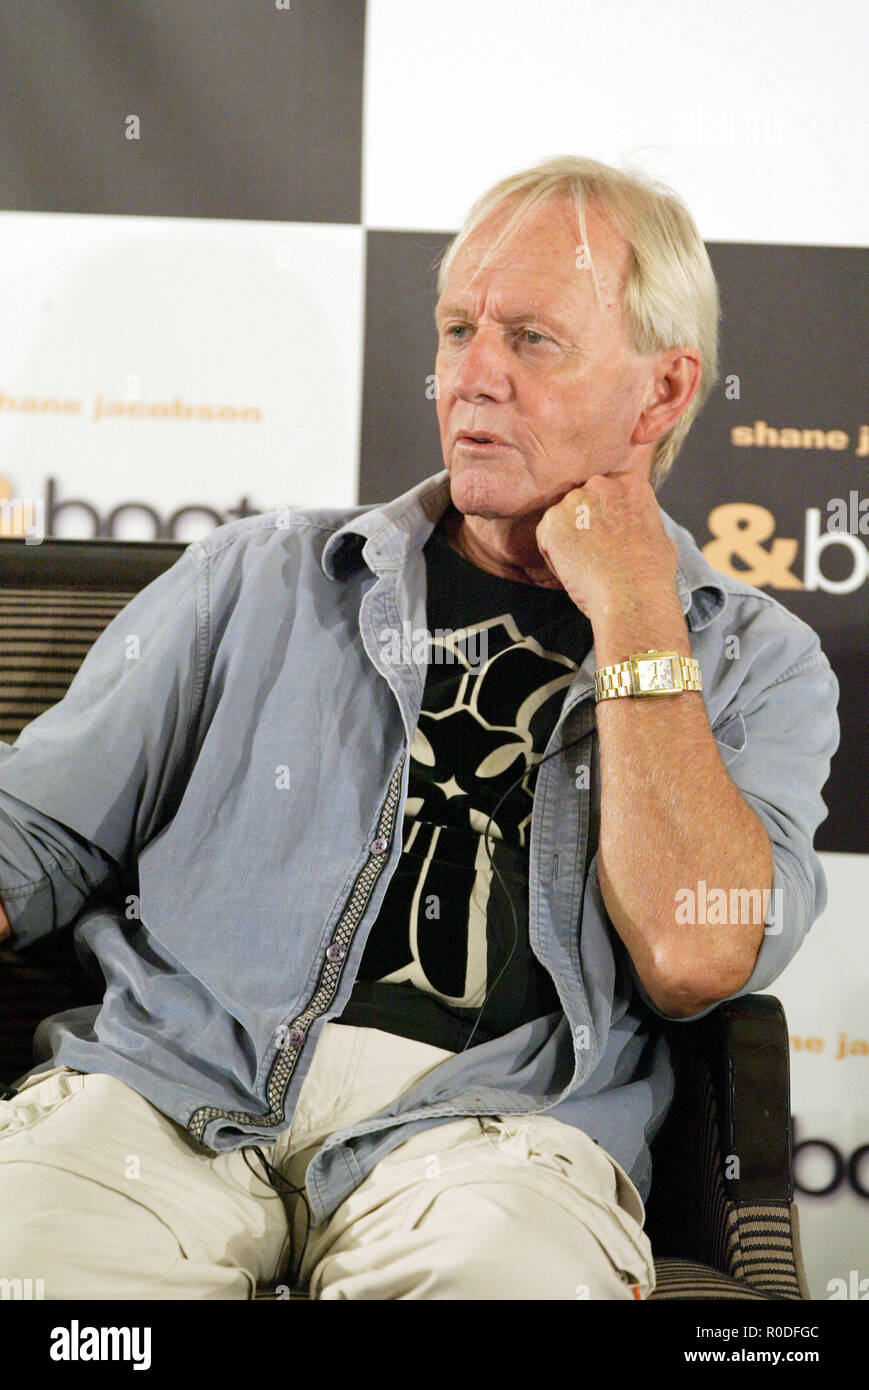 Paul Hogan Paul Hogan and Shane Jacobson a press conference for their film Charlie and Boots. Sydney, Australia. 28.10.08 Stock Photo - Alamy